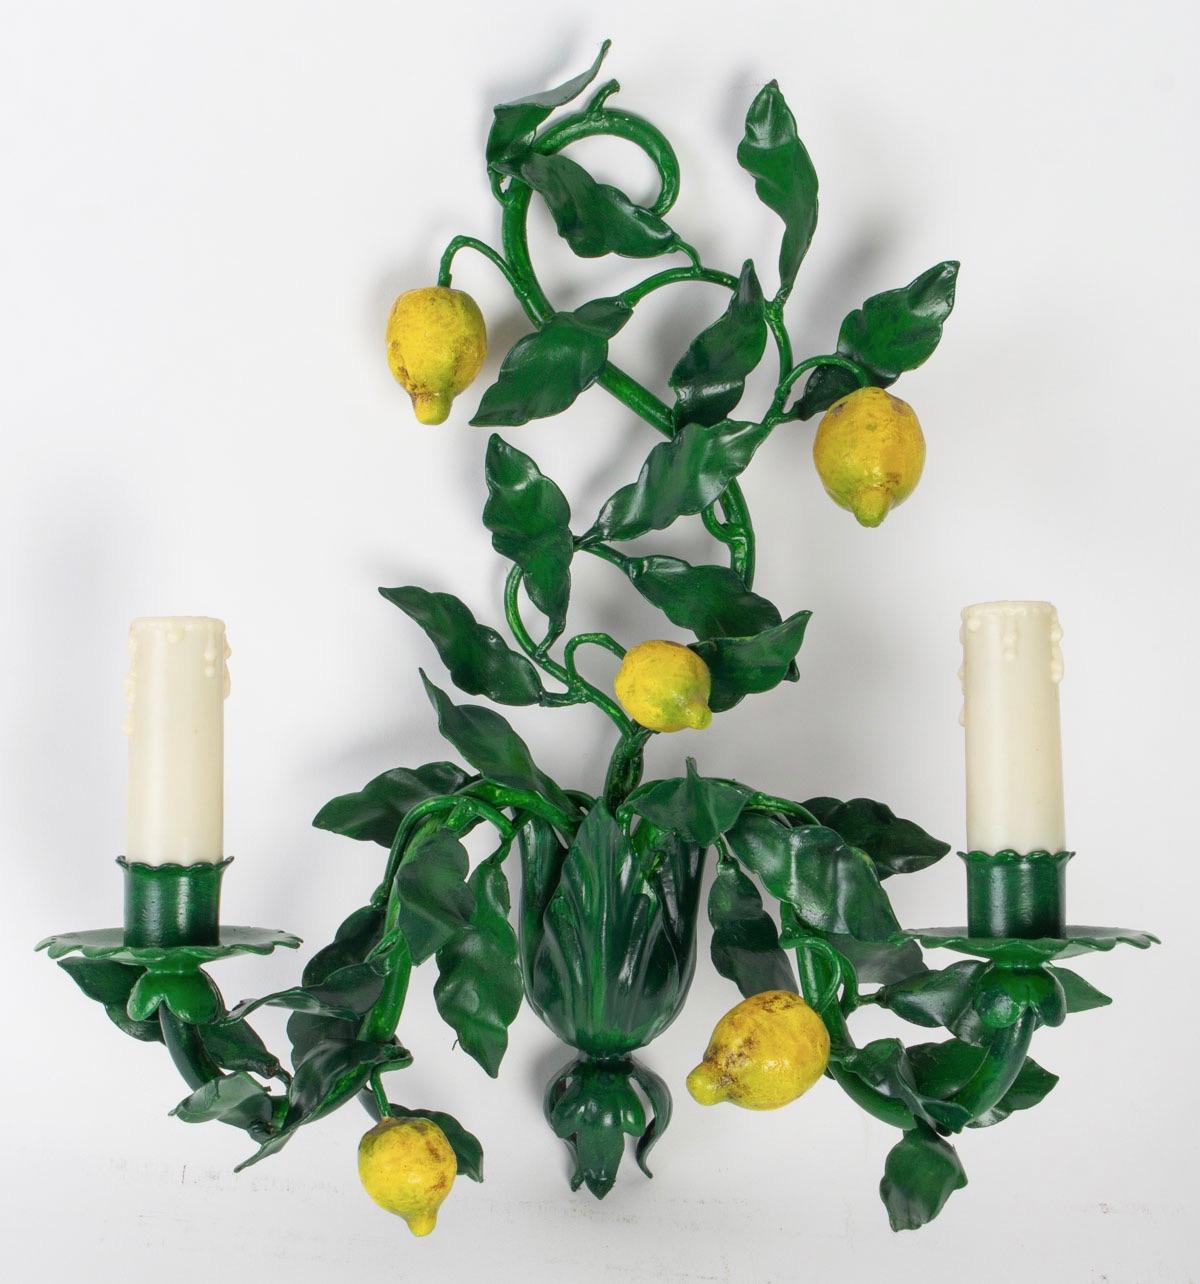 Charming pair of 1960s Maison Honore sconces.
They figure lemon tree branches with leaves and fruit made of painting wrought iron.
Two lighted armes per sconces.